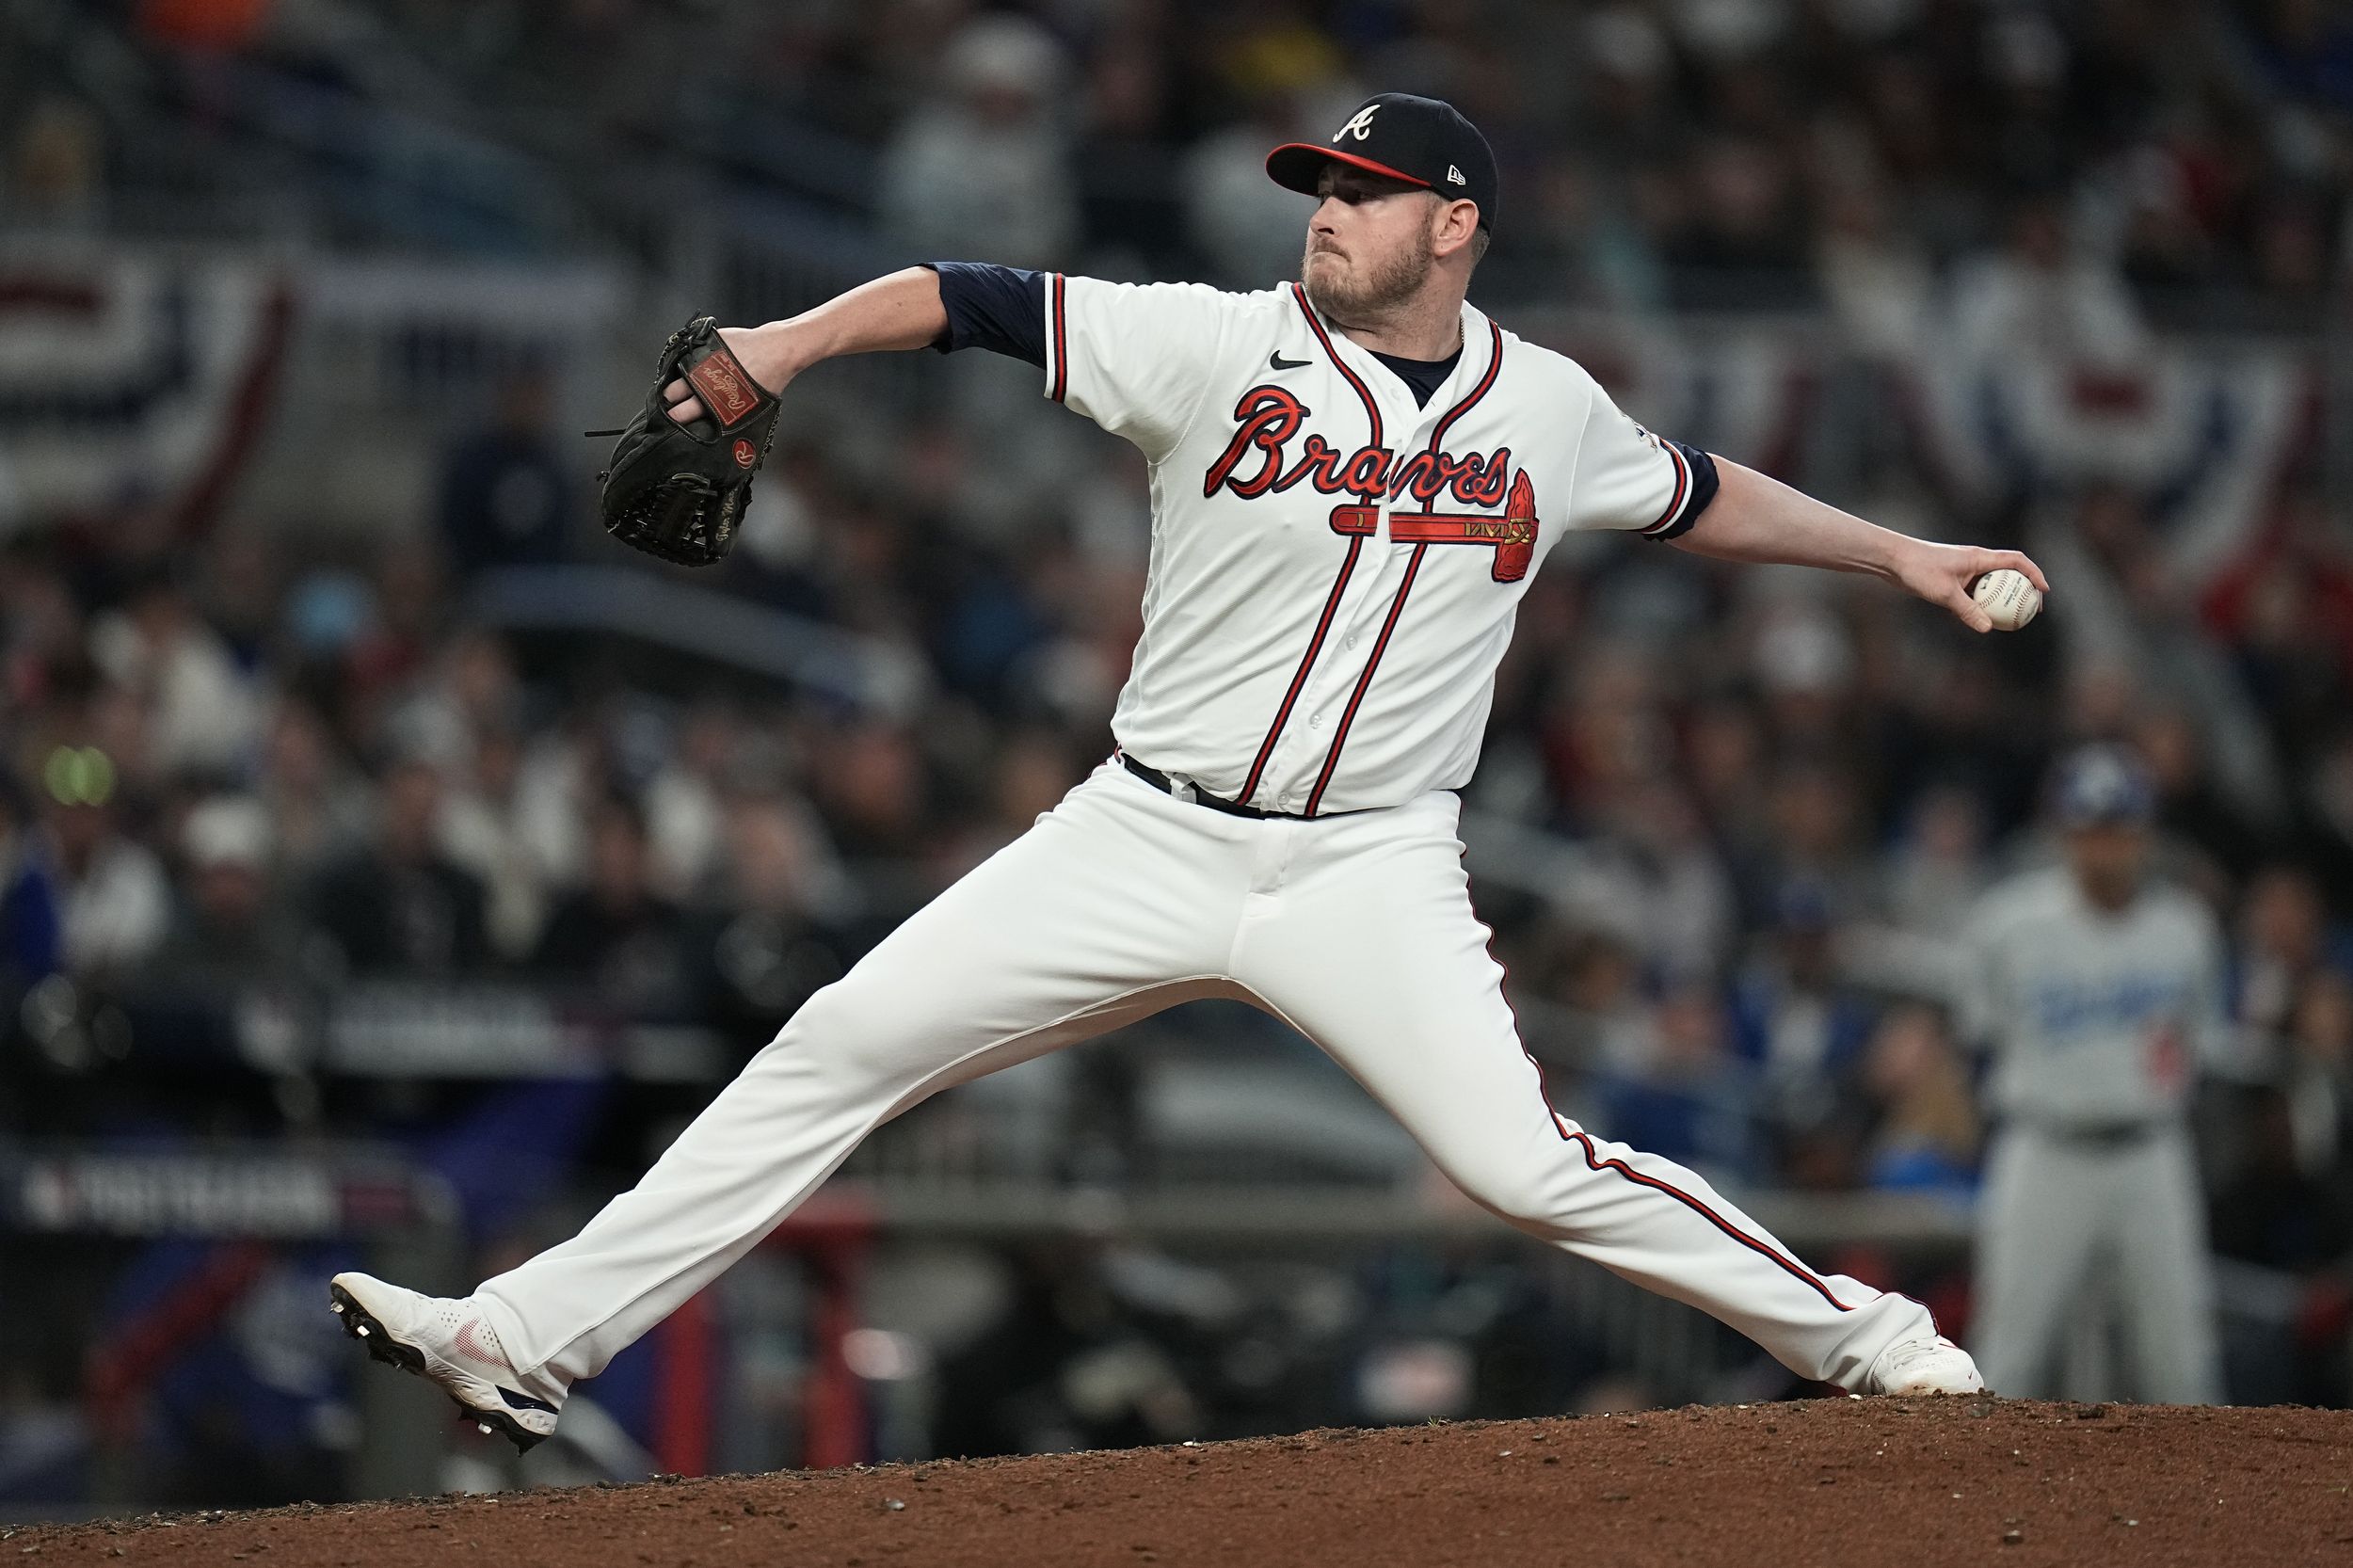 Riley's game-winning single in 9th lifts Braves past Dodgers – KXAN Austin